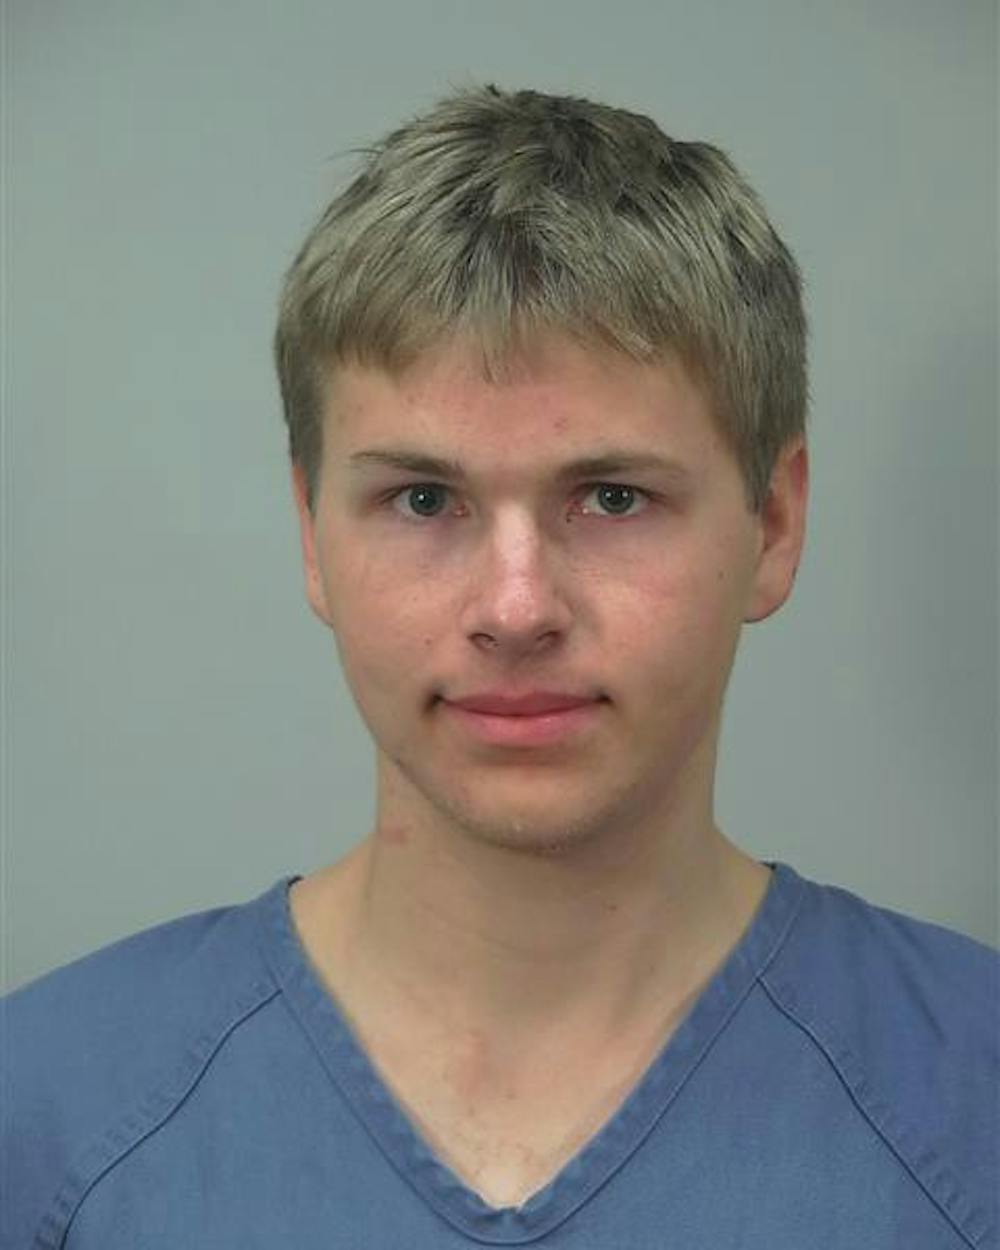 Suspended UW-Madison freshman Alec Shiva, who was arrested in November for second-degree sexual assault, will appear in court for a preliminary hearing Dec. 27.